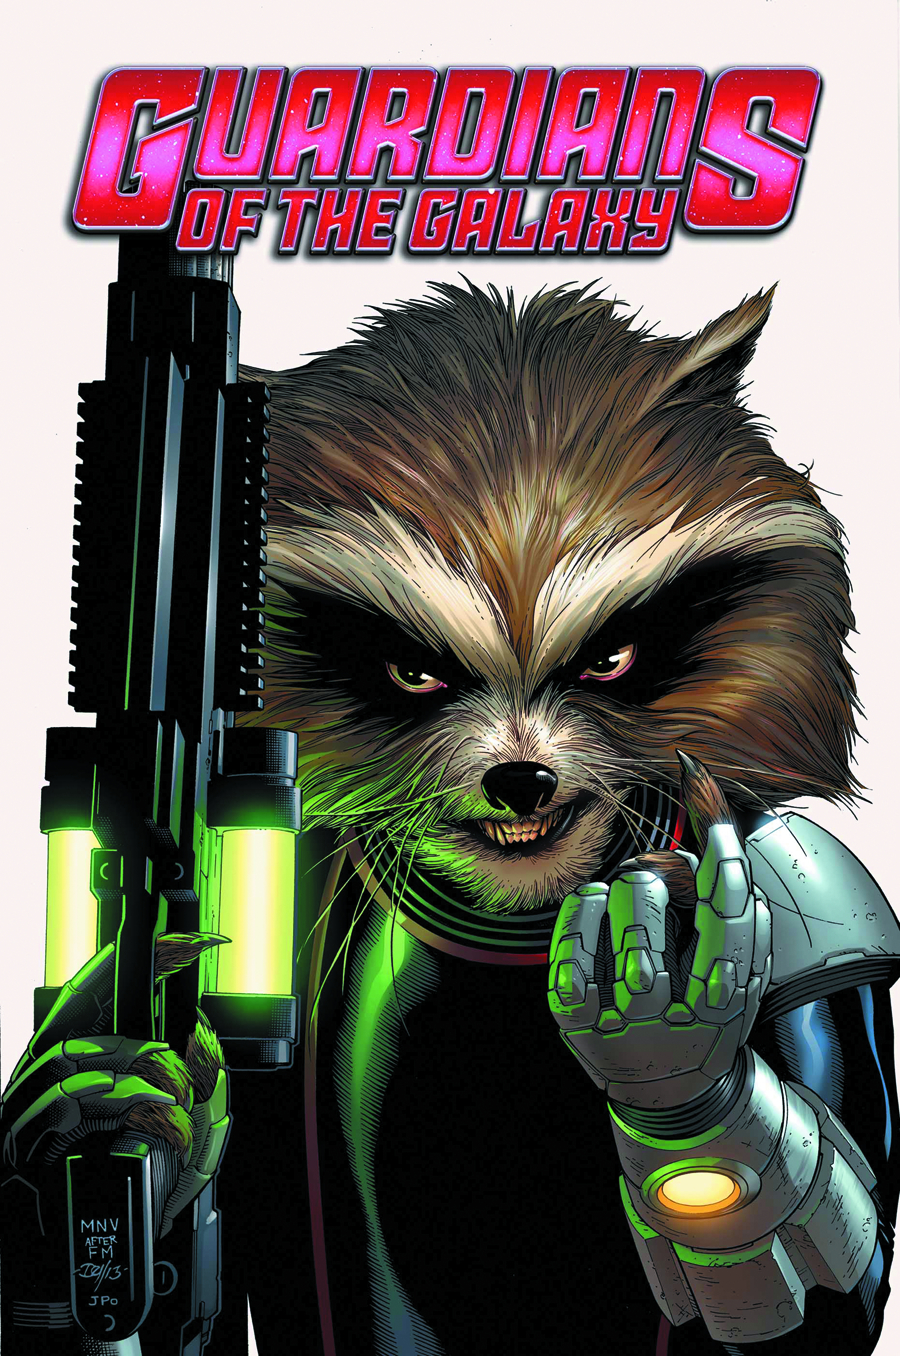 GUARDIANS OF GALAXY #3 NOW